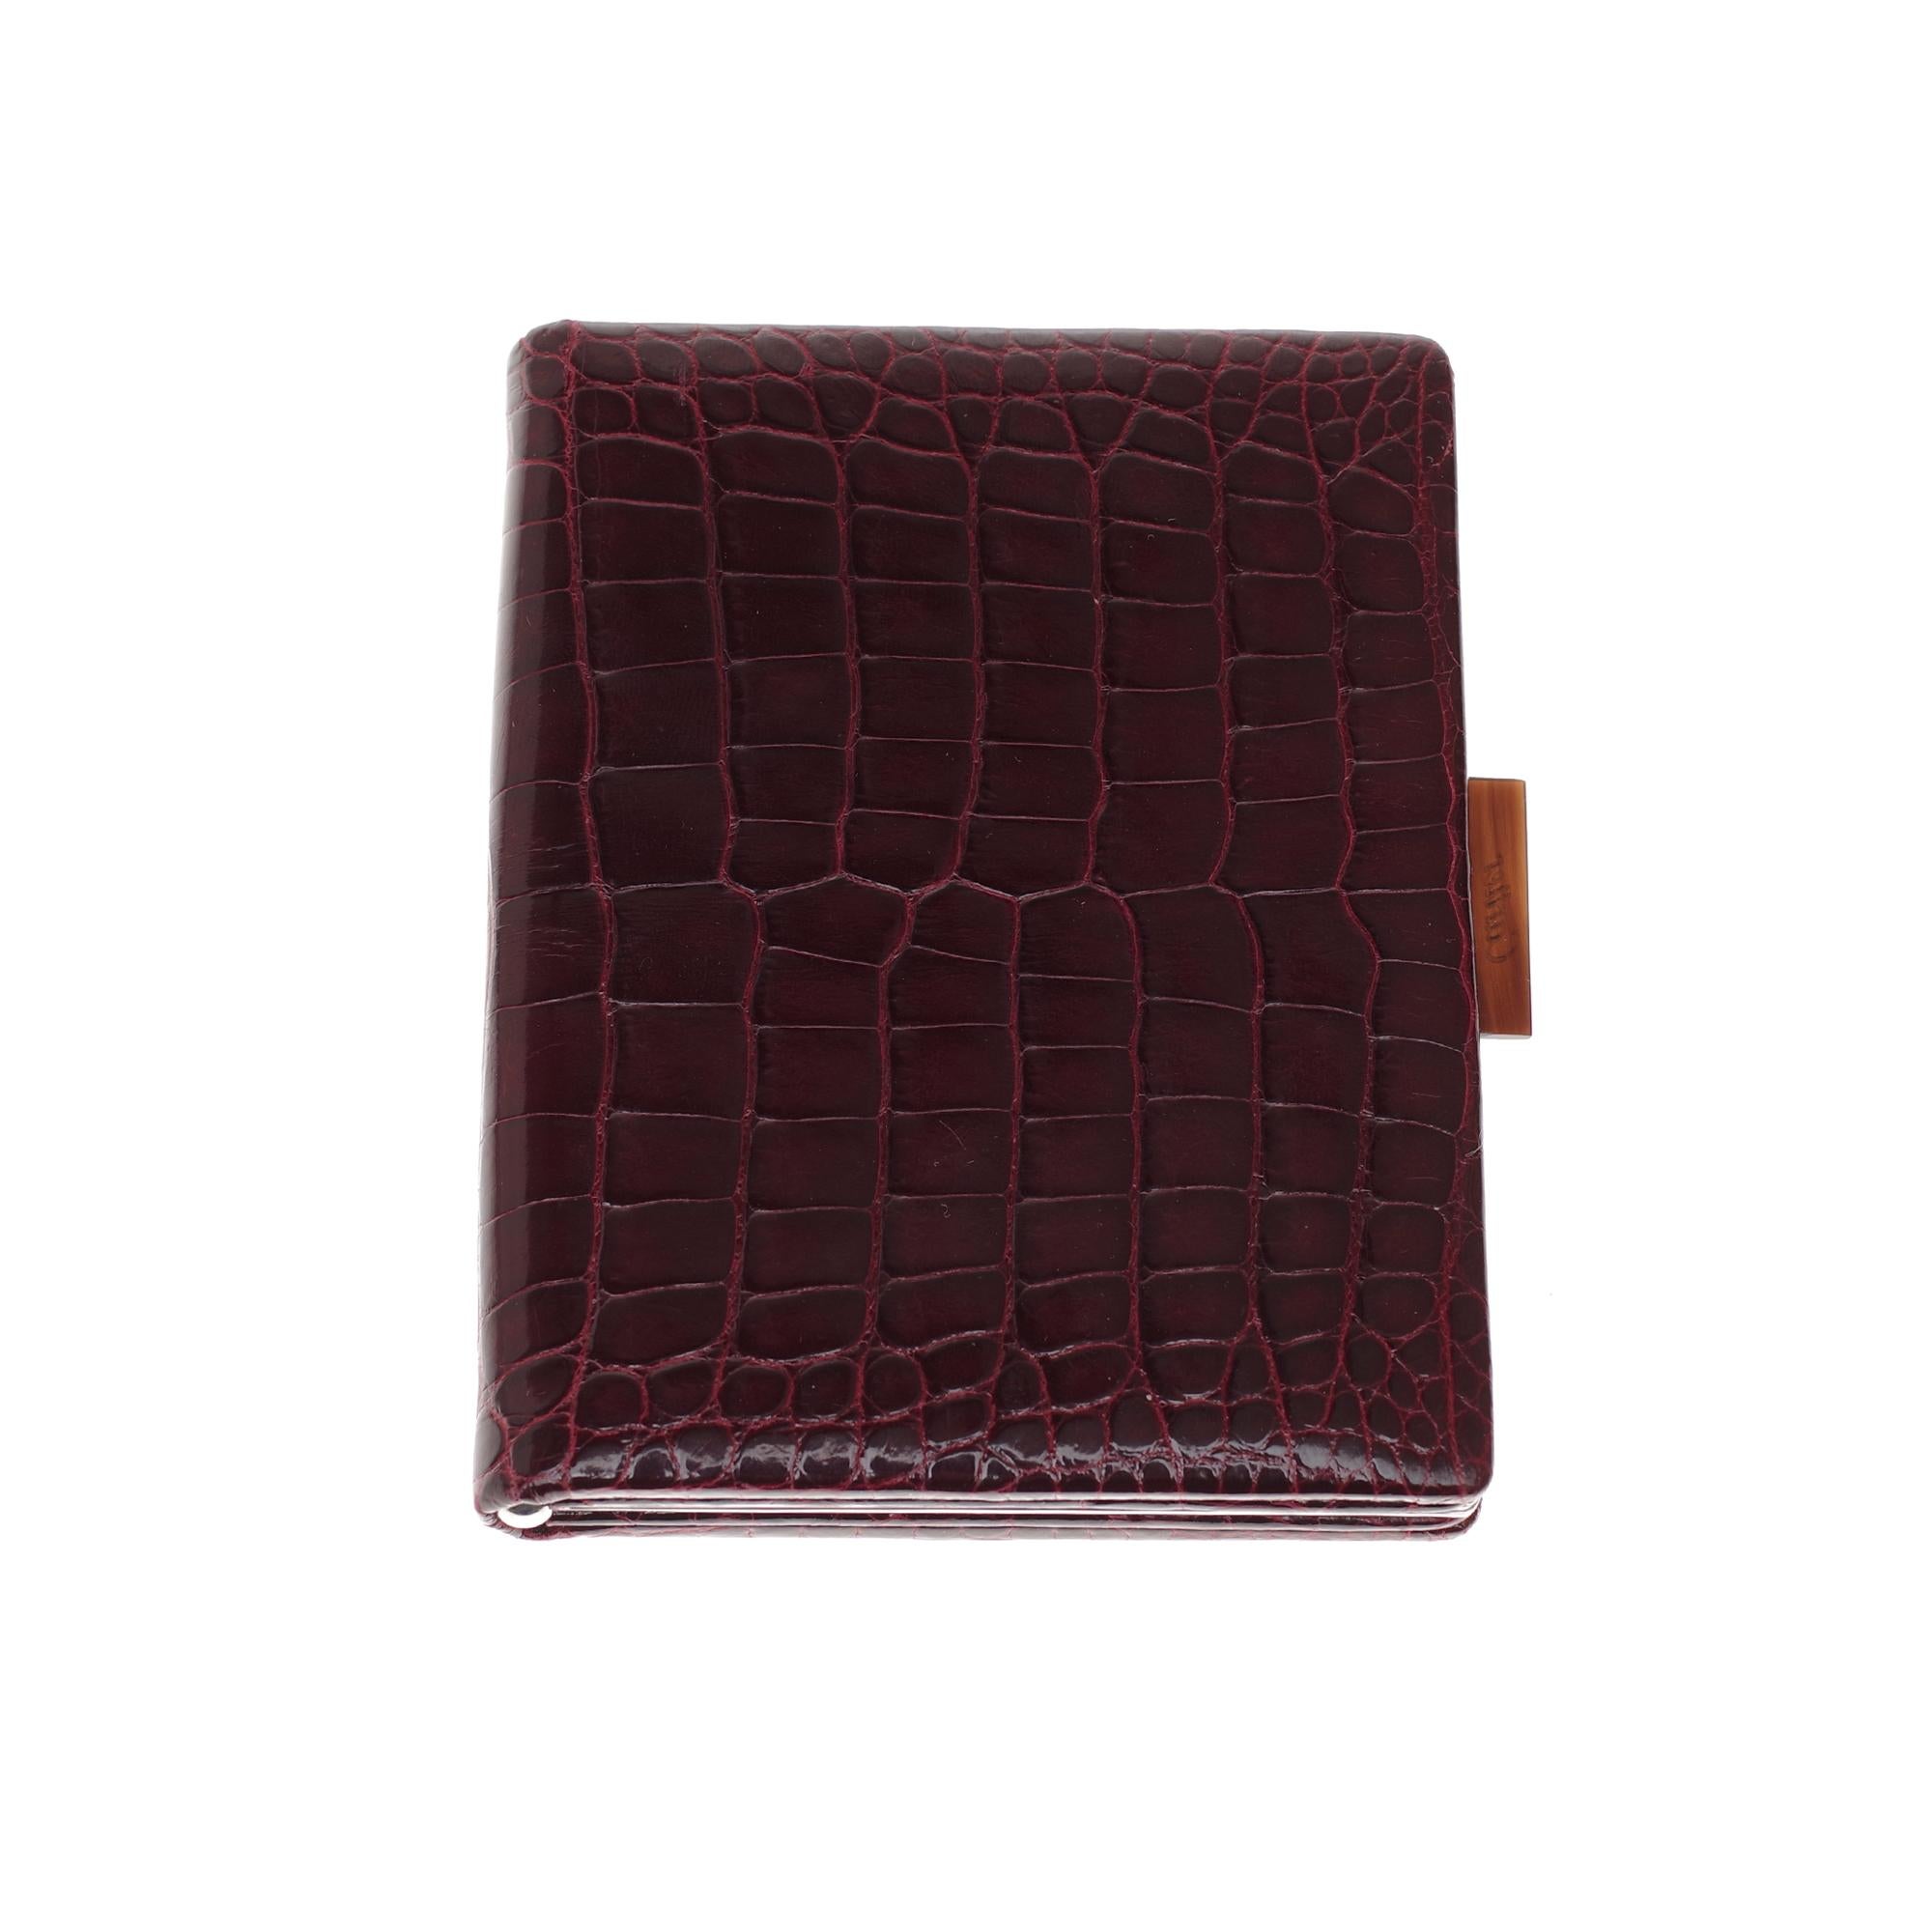 Cartier wallet in crocodile leather (crocodylus porosus, II/B) burgundy.
Burgundy leather interior, one coin compartment with snap closure, two card compartments, 1 patch pocket.
Silver-plated metal frame and black embossed push-button